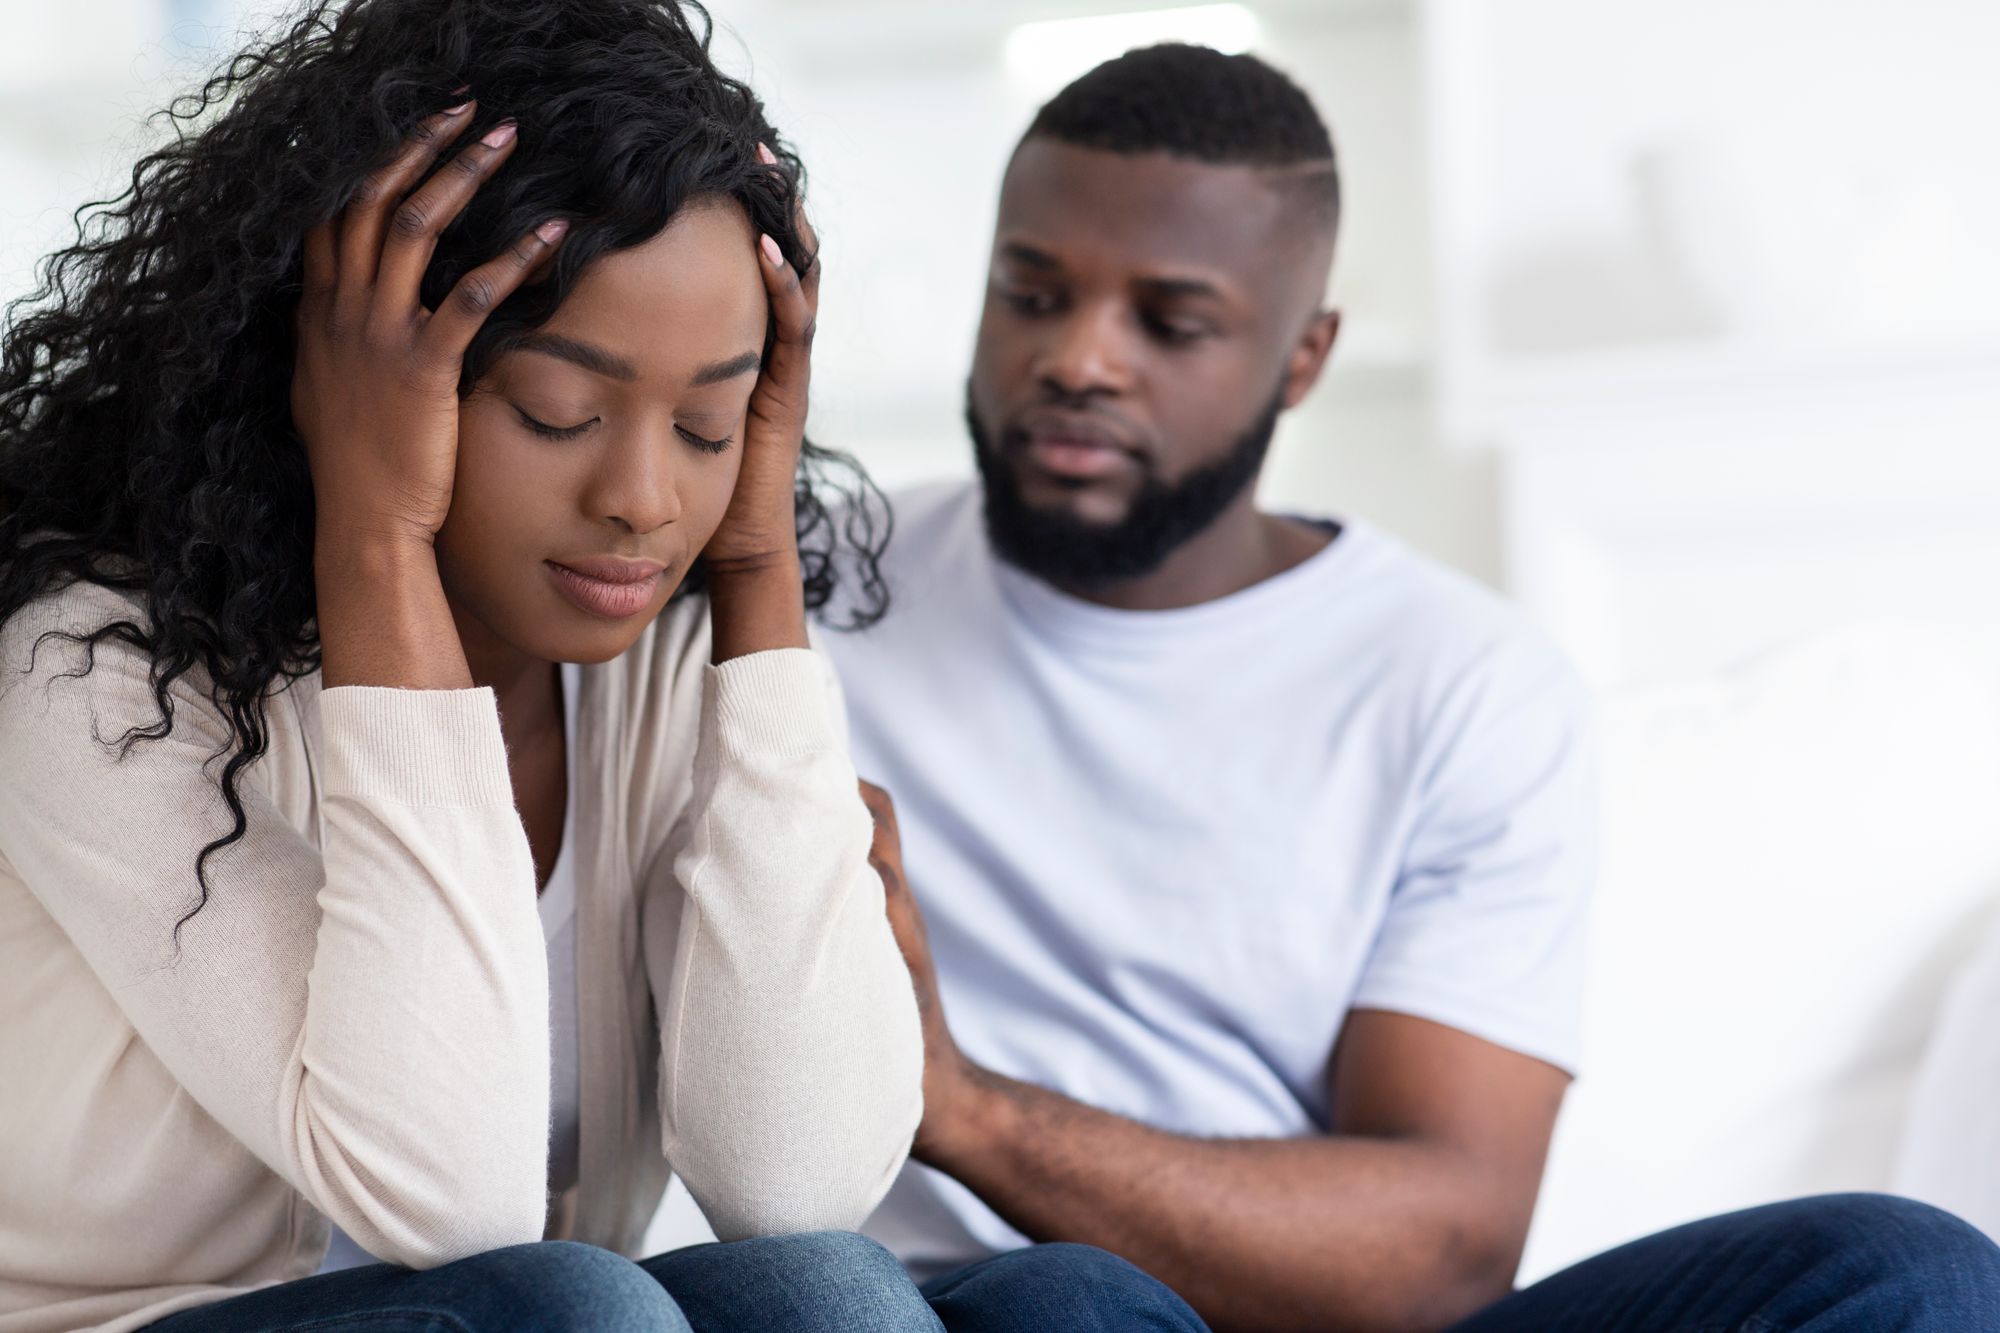 Leaving My Wife Was A Mistake, How Can I Move Forward?